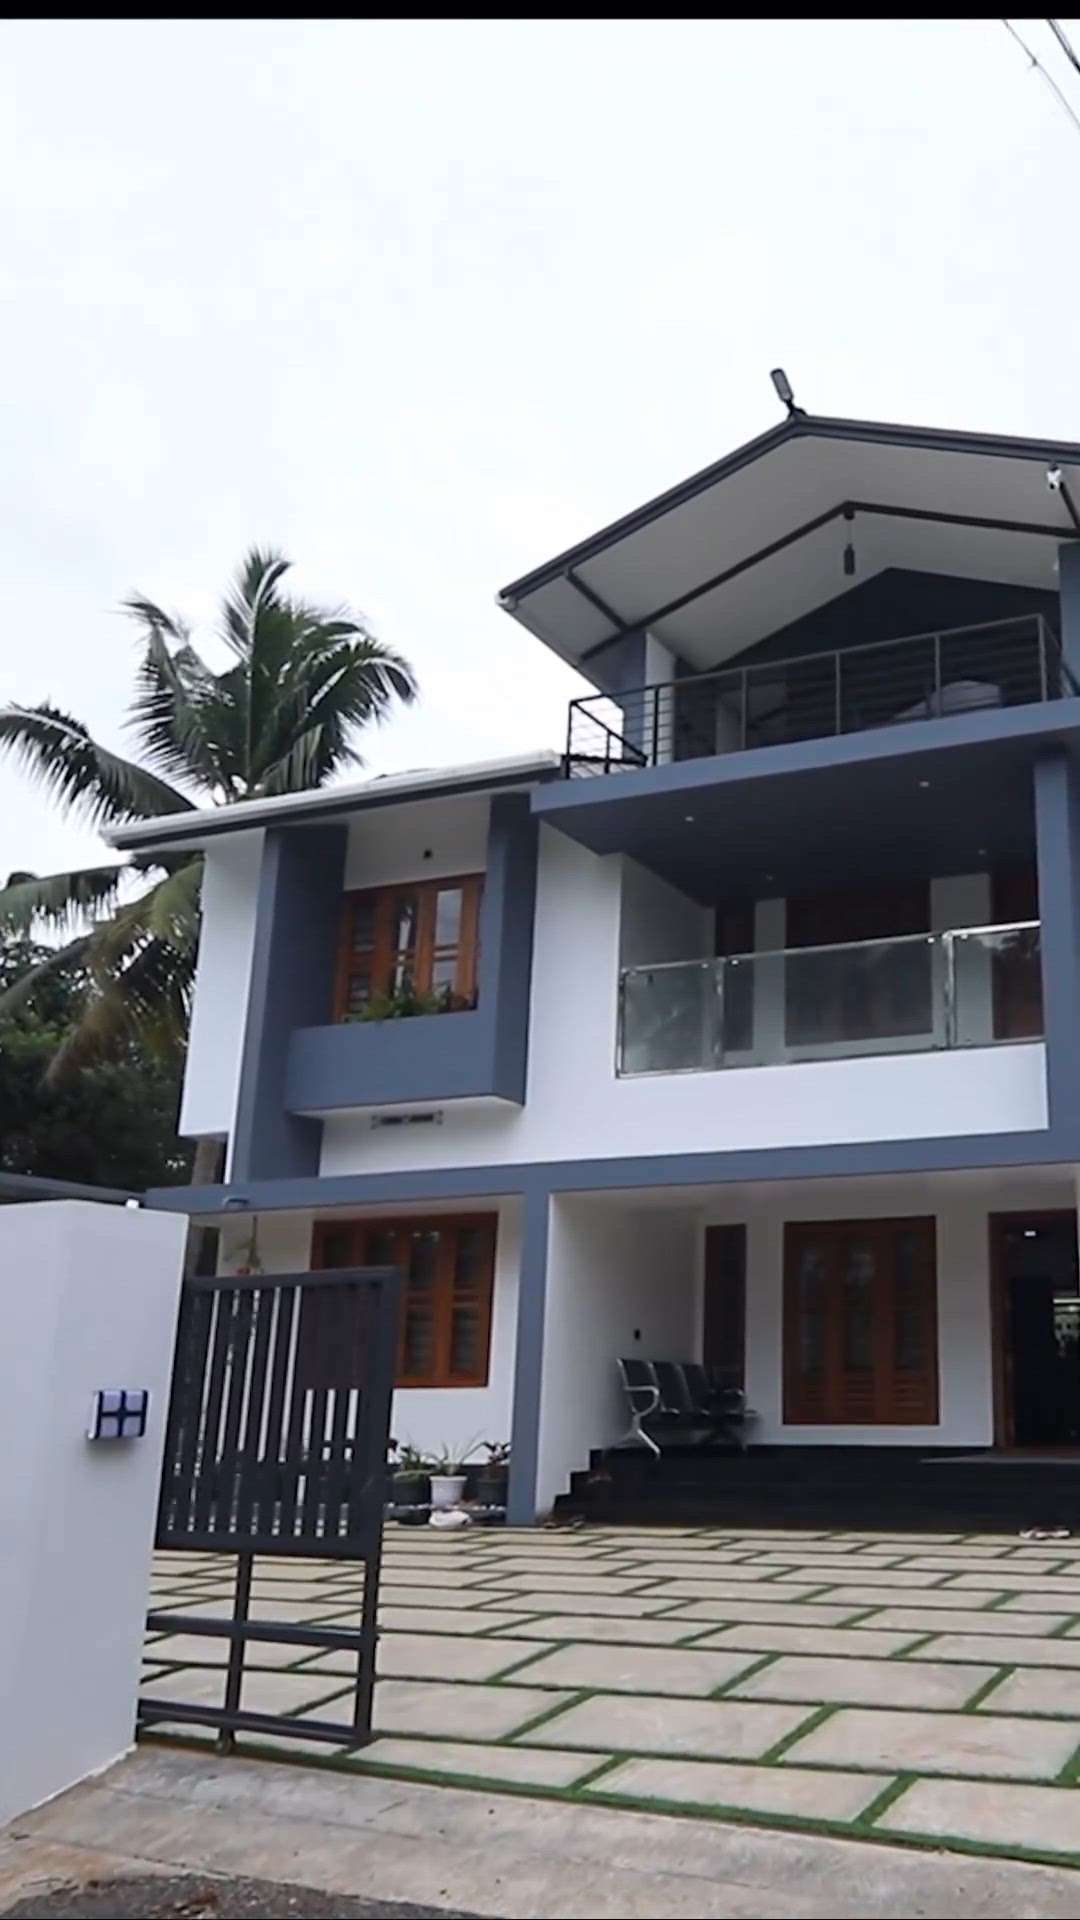 AB’s  Abode 

Project type : Residential 
Area : 2950sqft
Location : Arimbur ,Thrissur 
Status : Completed 
Other details: 4 BHK
Approx cost : 85 lkh 
Full video on YouTube

https://youtu.be/0VfbFY4i1pI

#KeralaStyleHouse #architecture_minimal #SlopingRoofHouse #IndoorPlants #SteelStaircase #atticspace #upvcwindows #SlidingWindows #LandscapeGarden